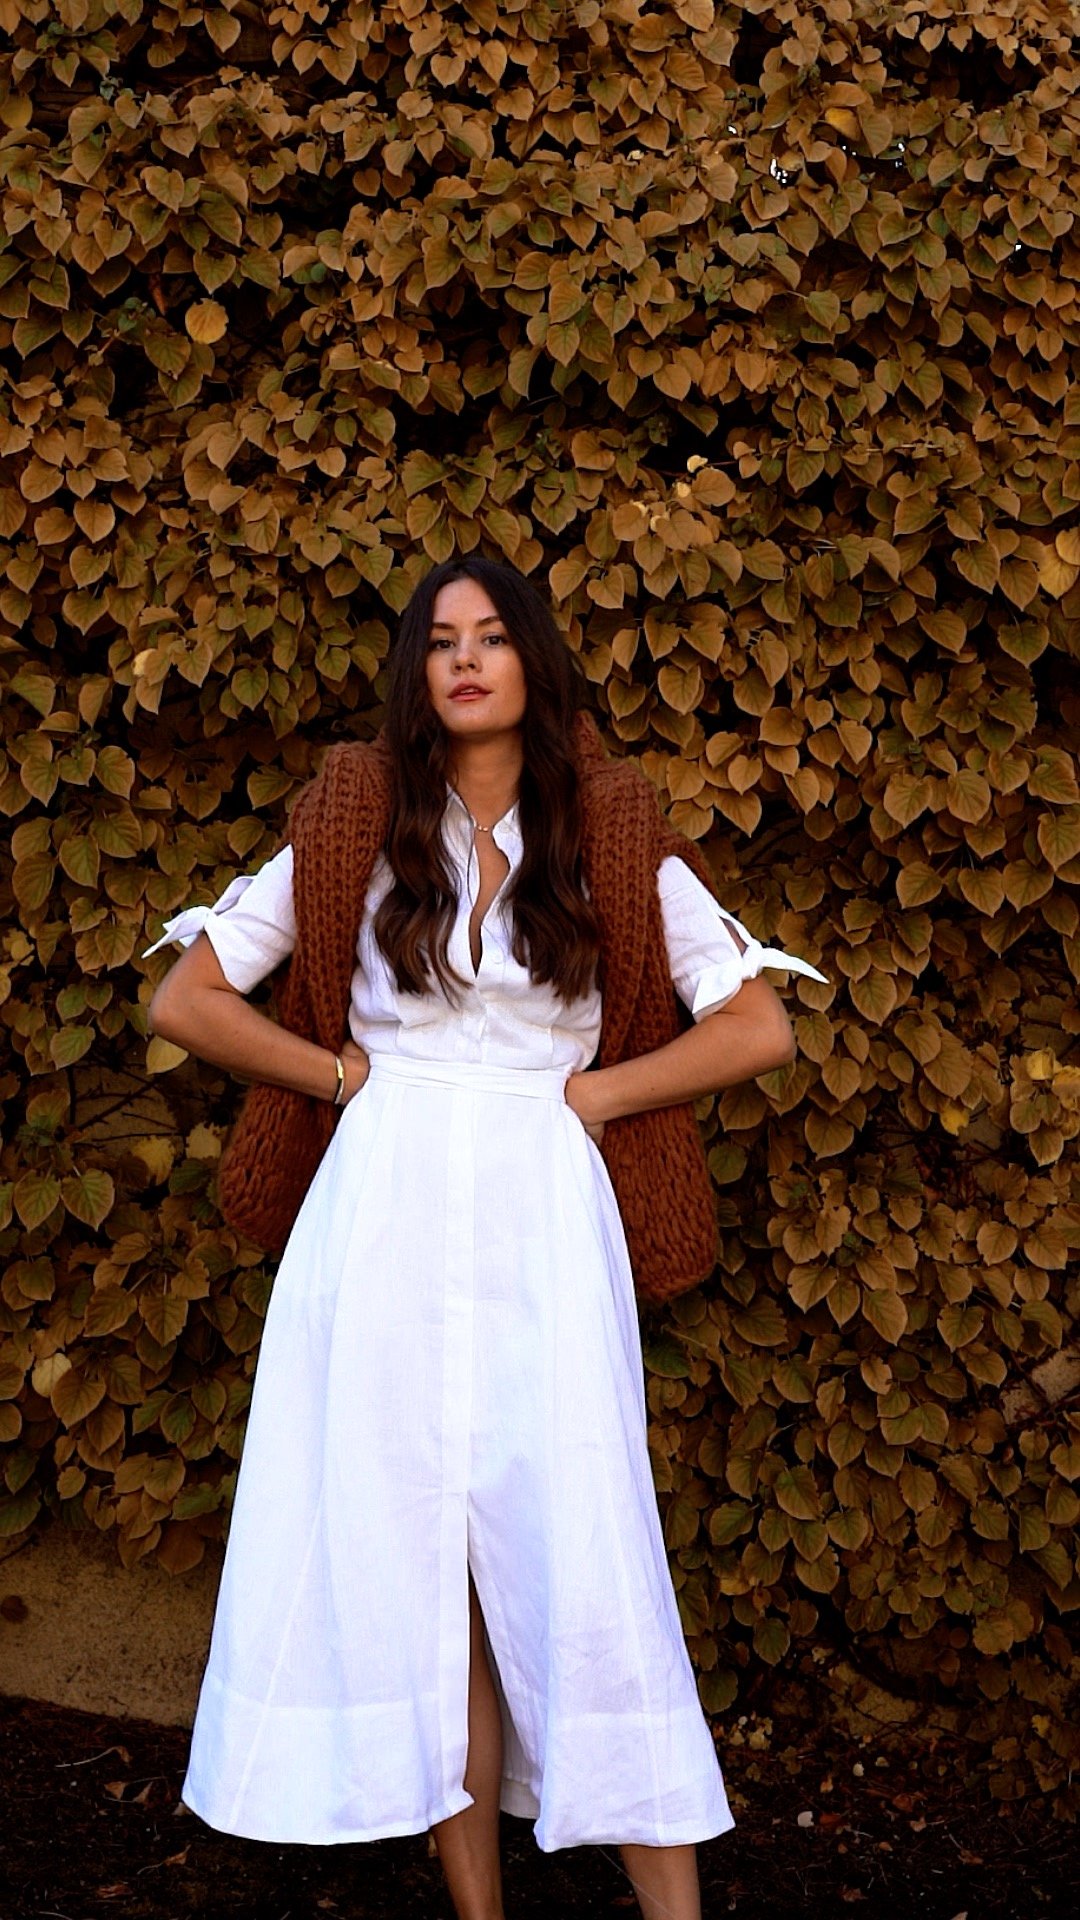 Parisian Style Fall Chic Outfits, Warm fall Outfits, Fall Brunch Outfit. @sarahchristine wearing white midi dress with brown sweater and Chanel bag outfit -2.jpg